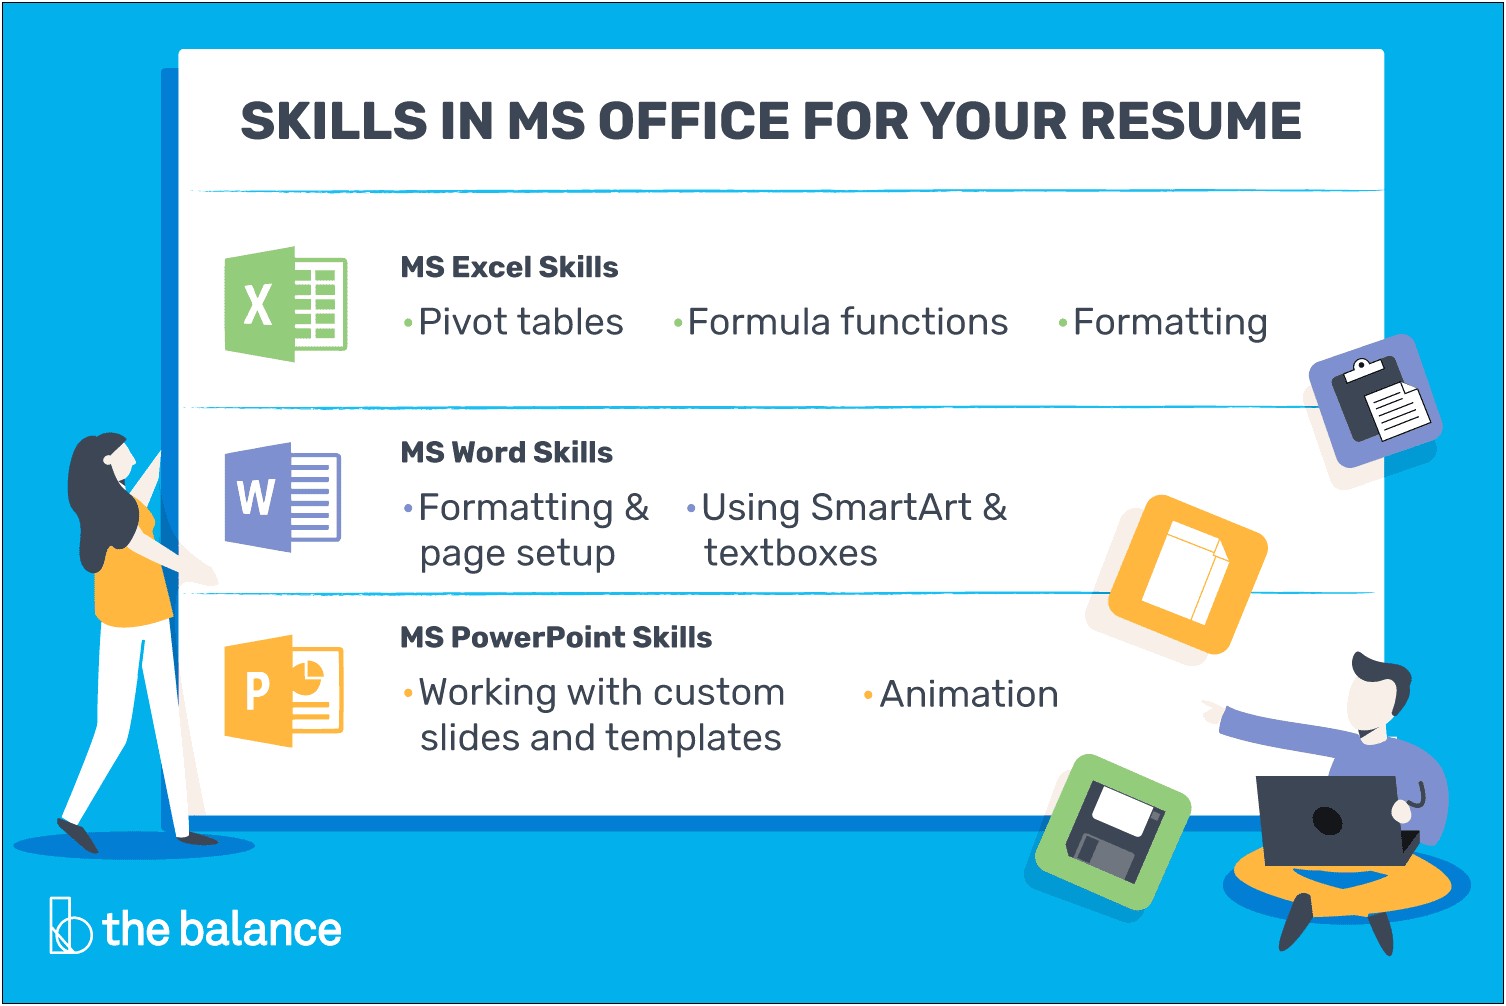 Resume Familiar With Microsoft Office Products Example